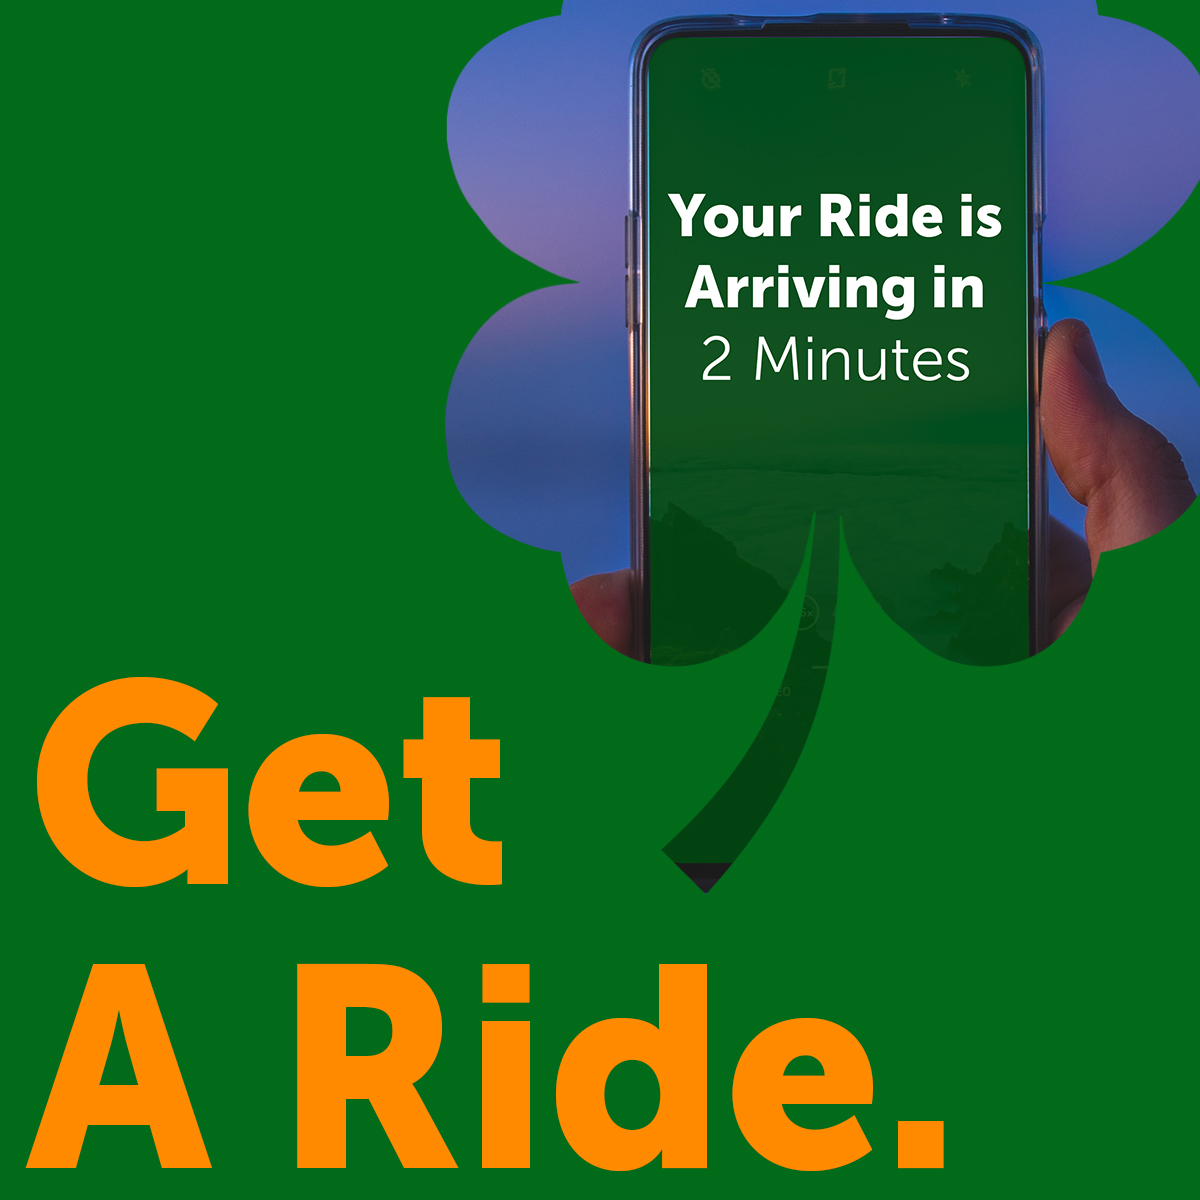 Don't Test Your Luck: Don't Drive Drunk this St. Patrick's Day